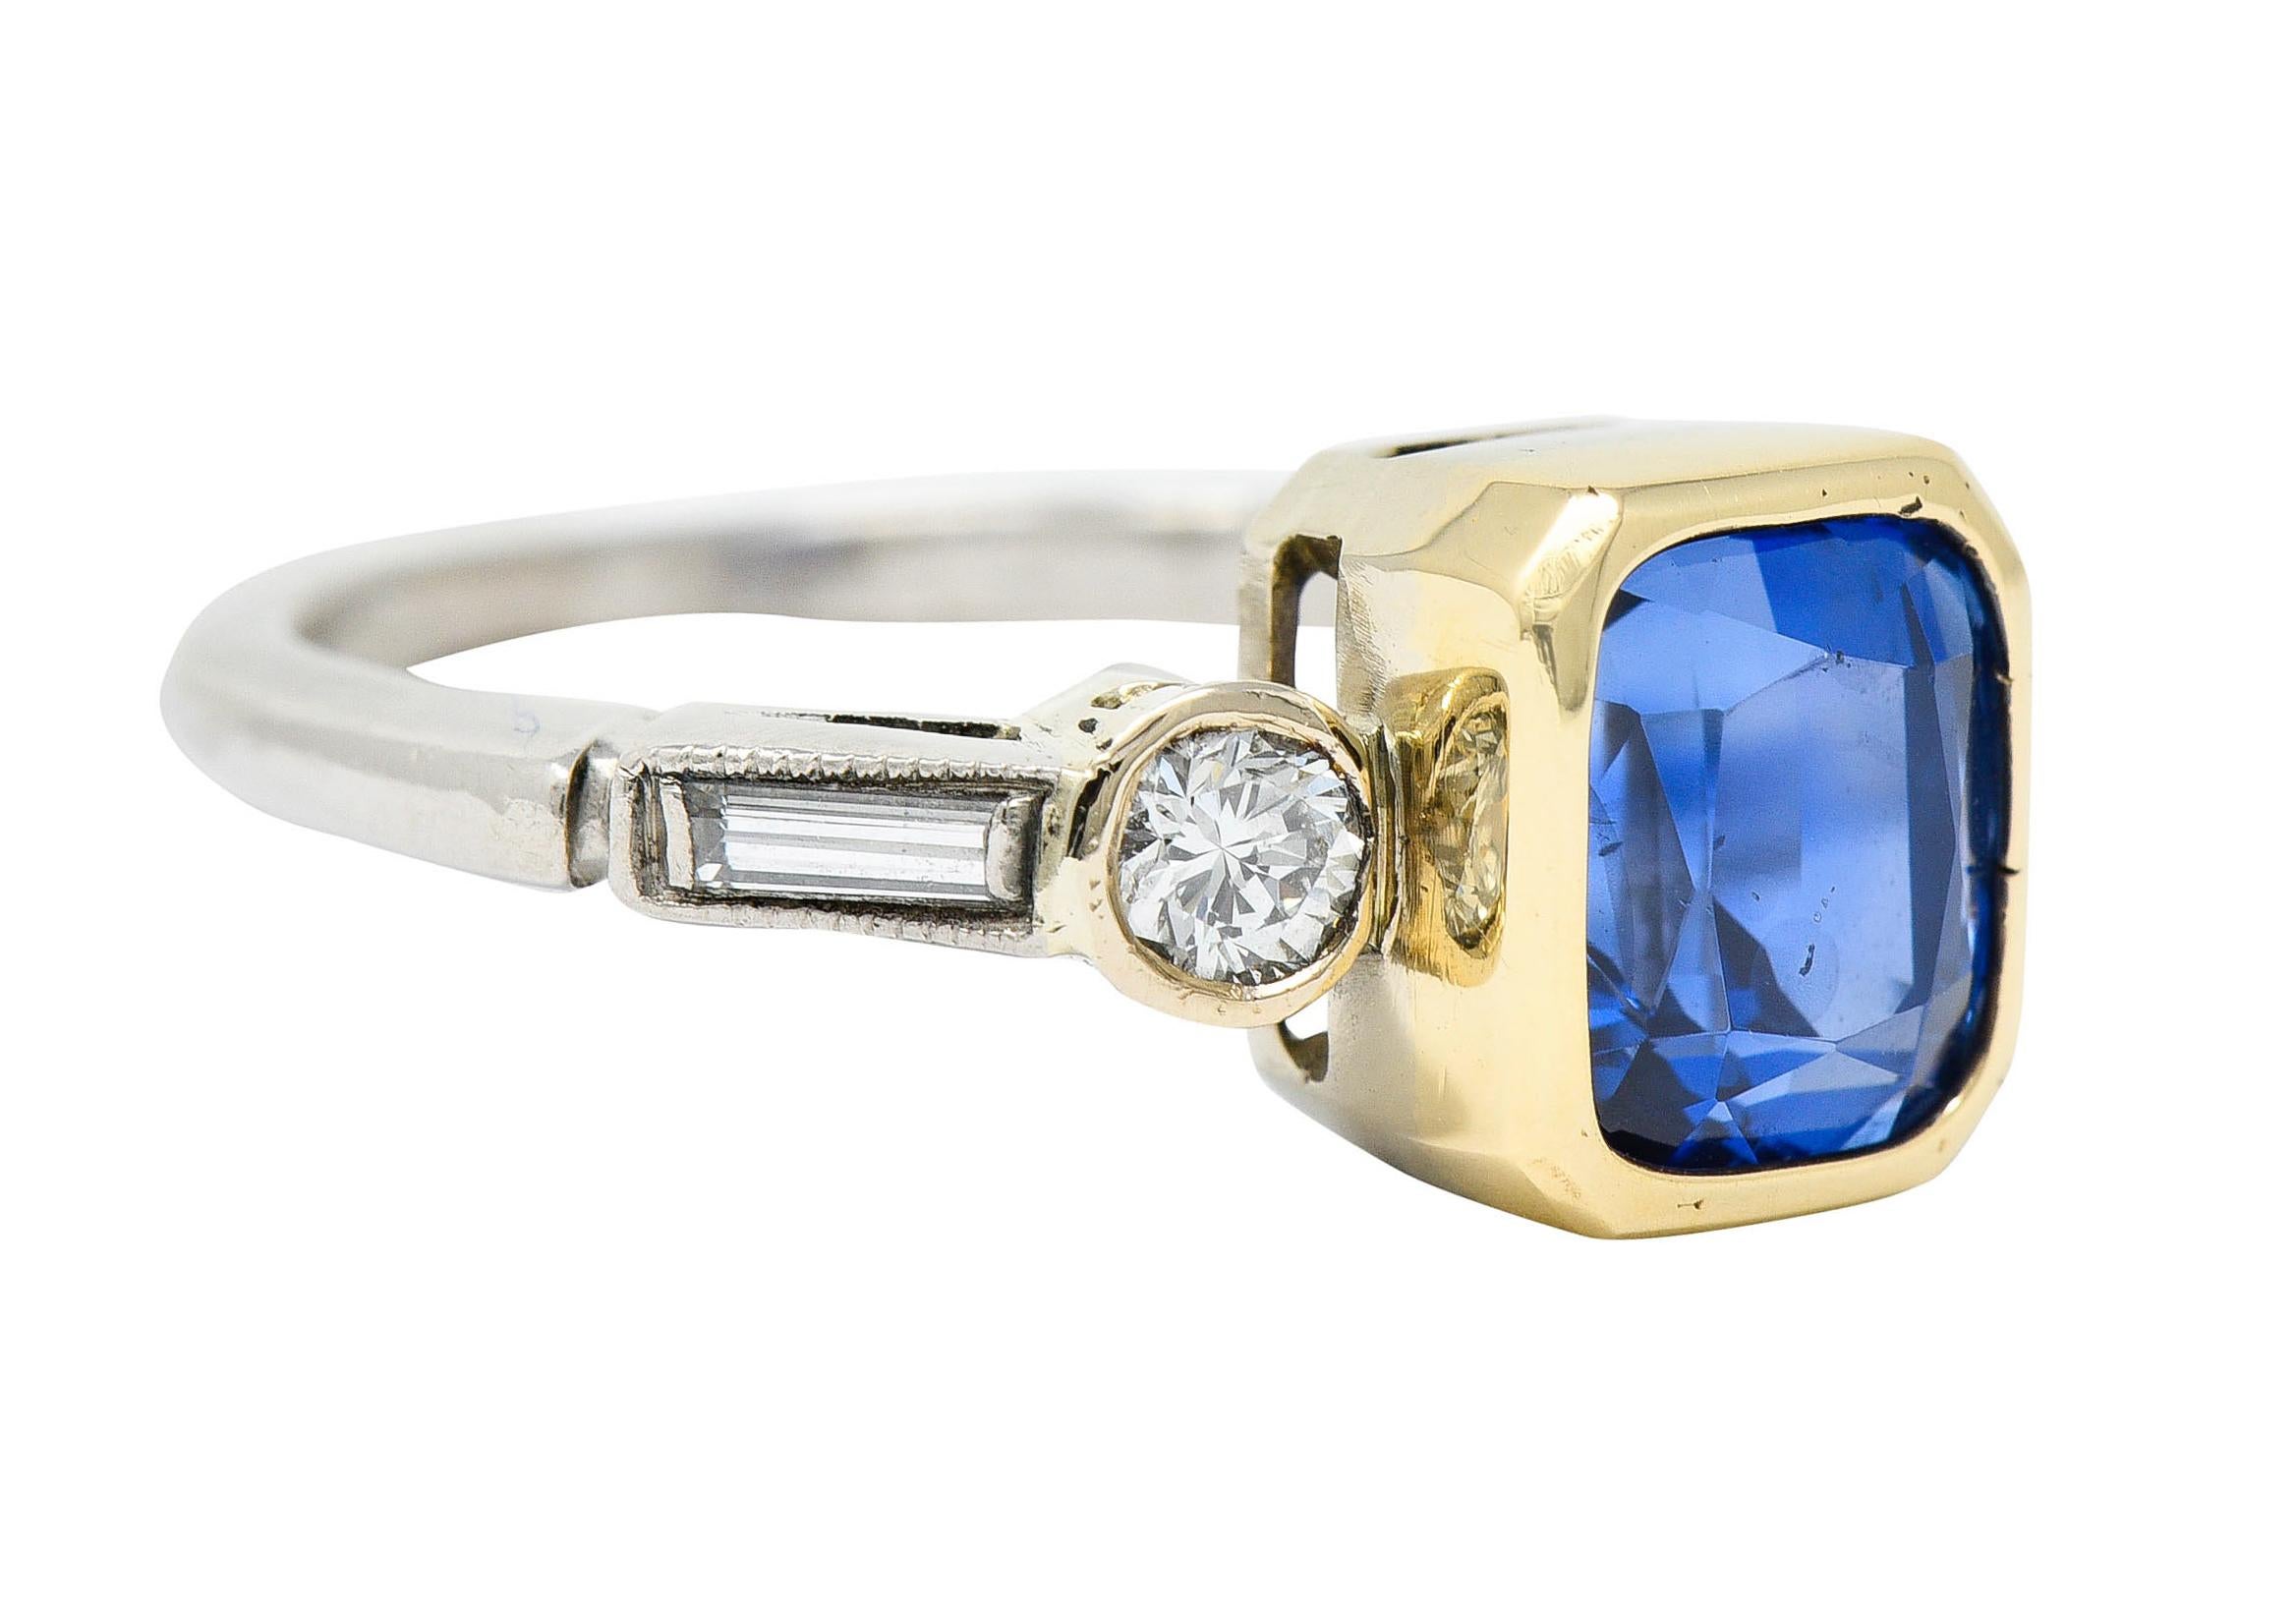 Centering a cushion cut sapphire weighing approximately 3.20 carats

Bright royal blue in color and bezel set in a polished gold surround

Flanked by geometric shoulders featuring bezel set round brilliant and baguette cut diamonds

Weighing in